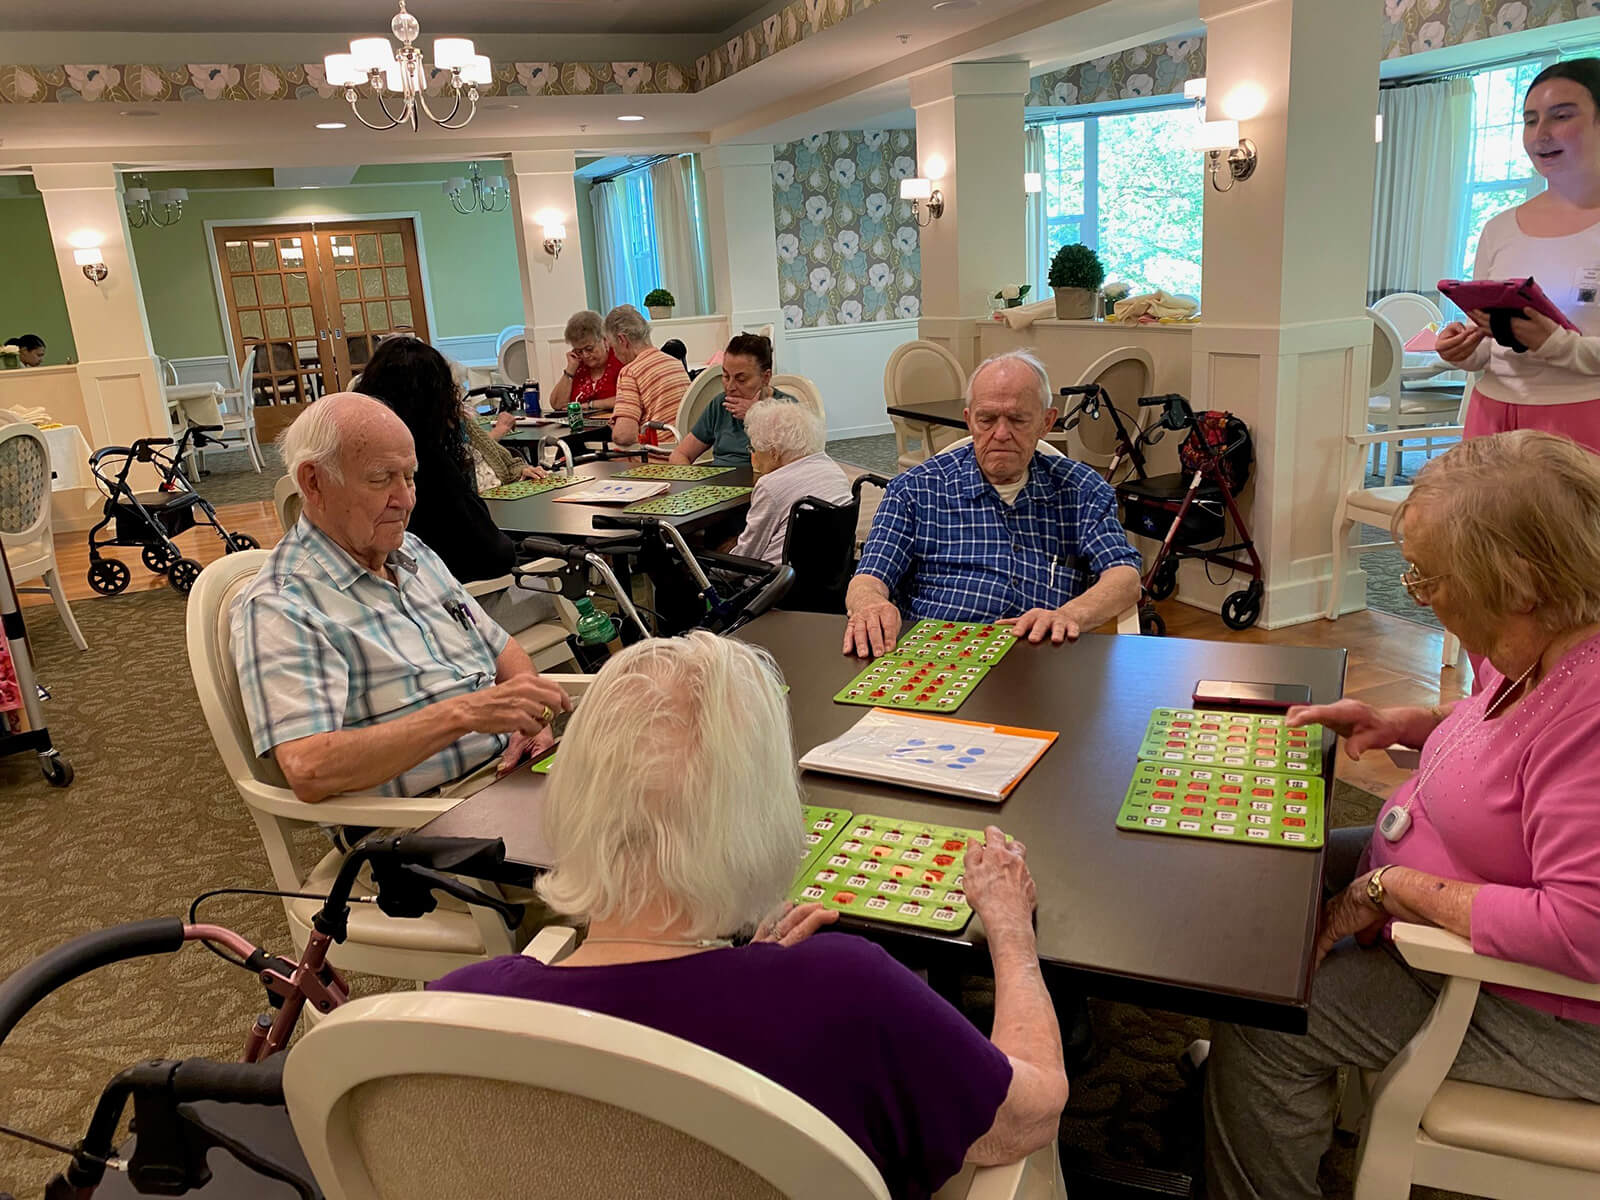 A charming scene at The Waters of Oakdale with residents donning creative hats, enhancing the vibrant and playful community life.